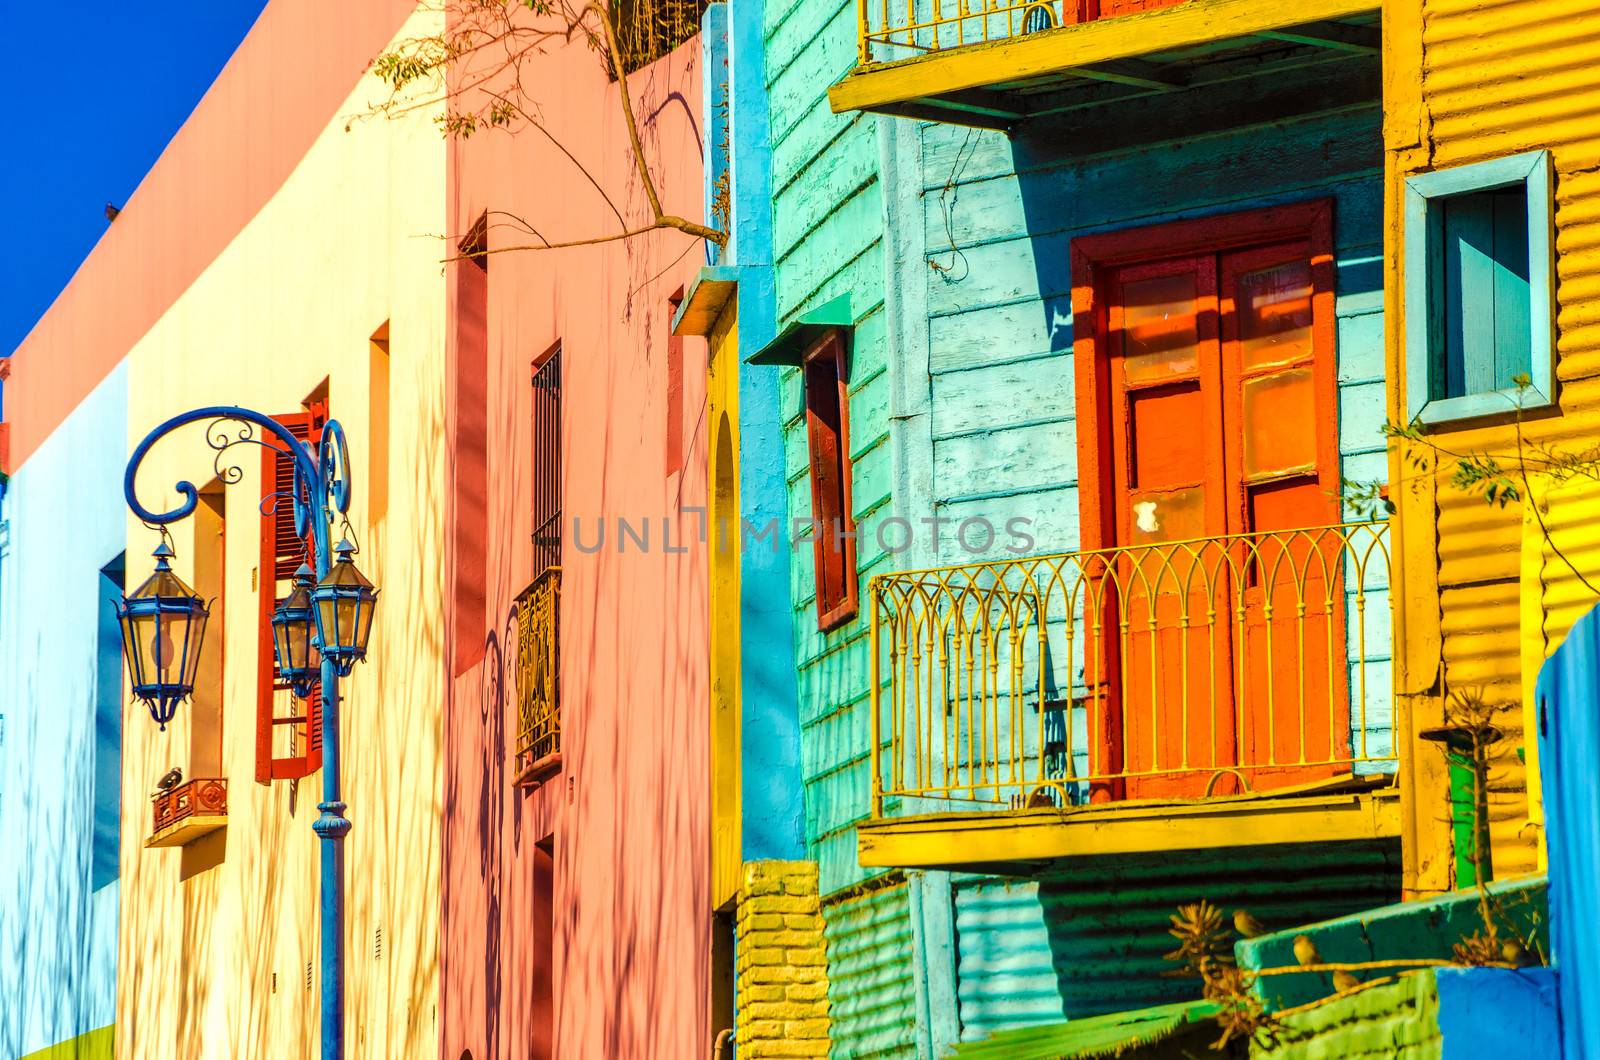 Buenos Aires Colors by jkraft5